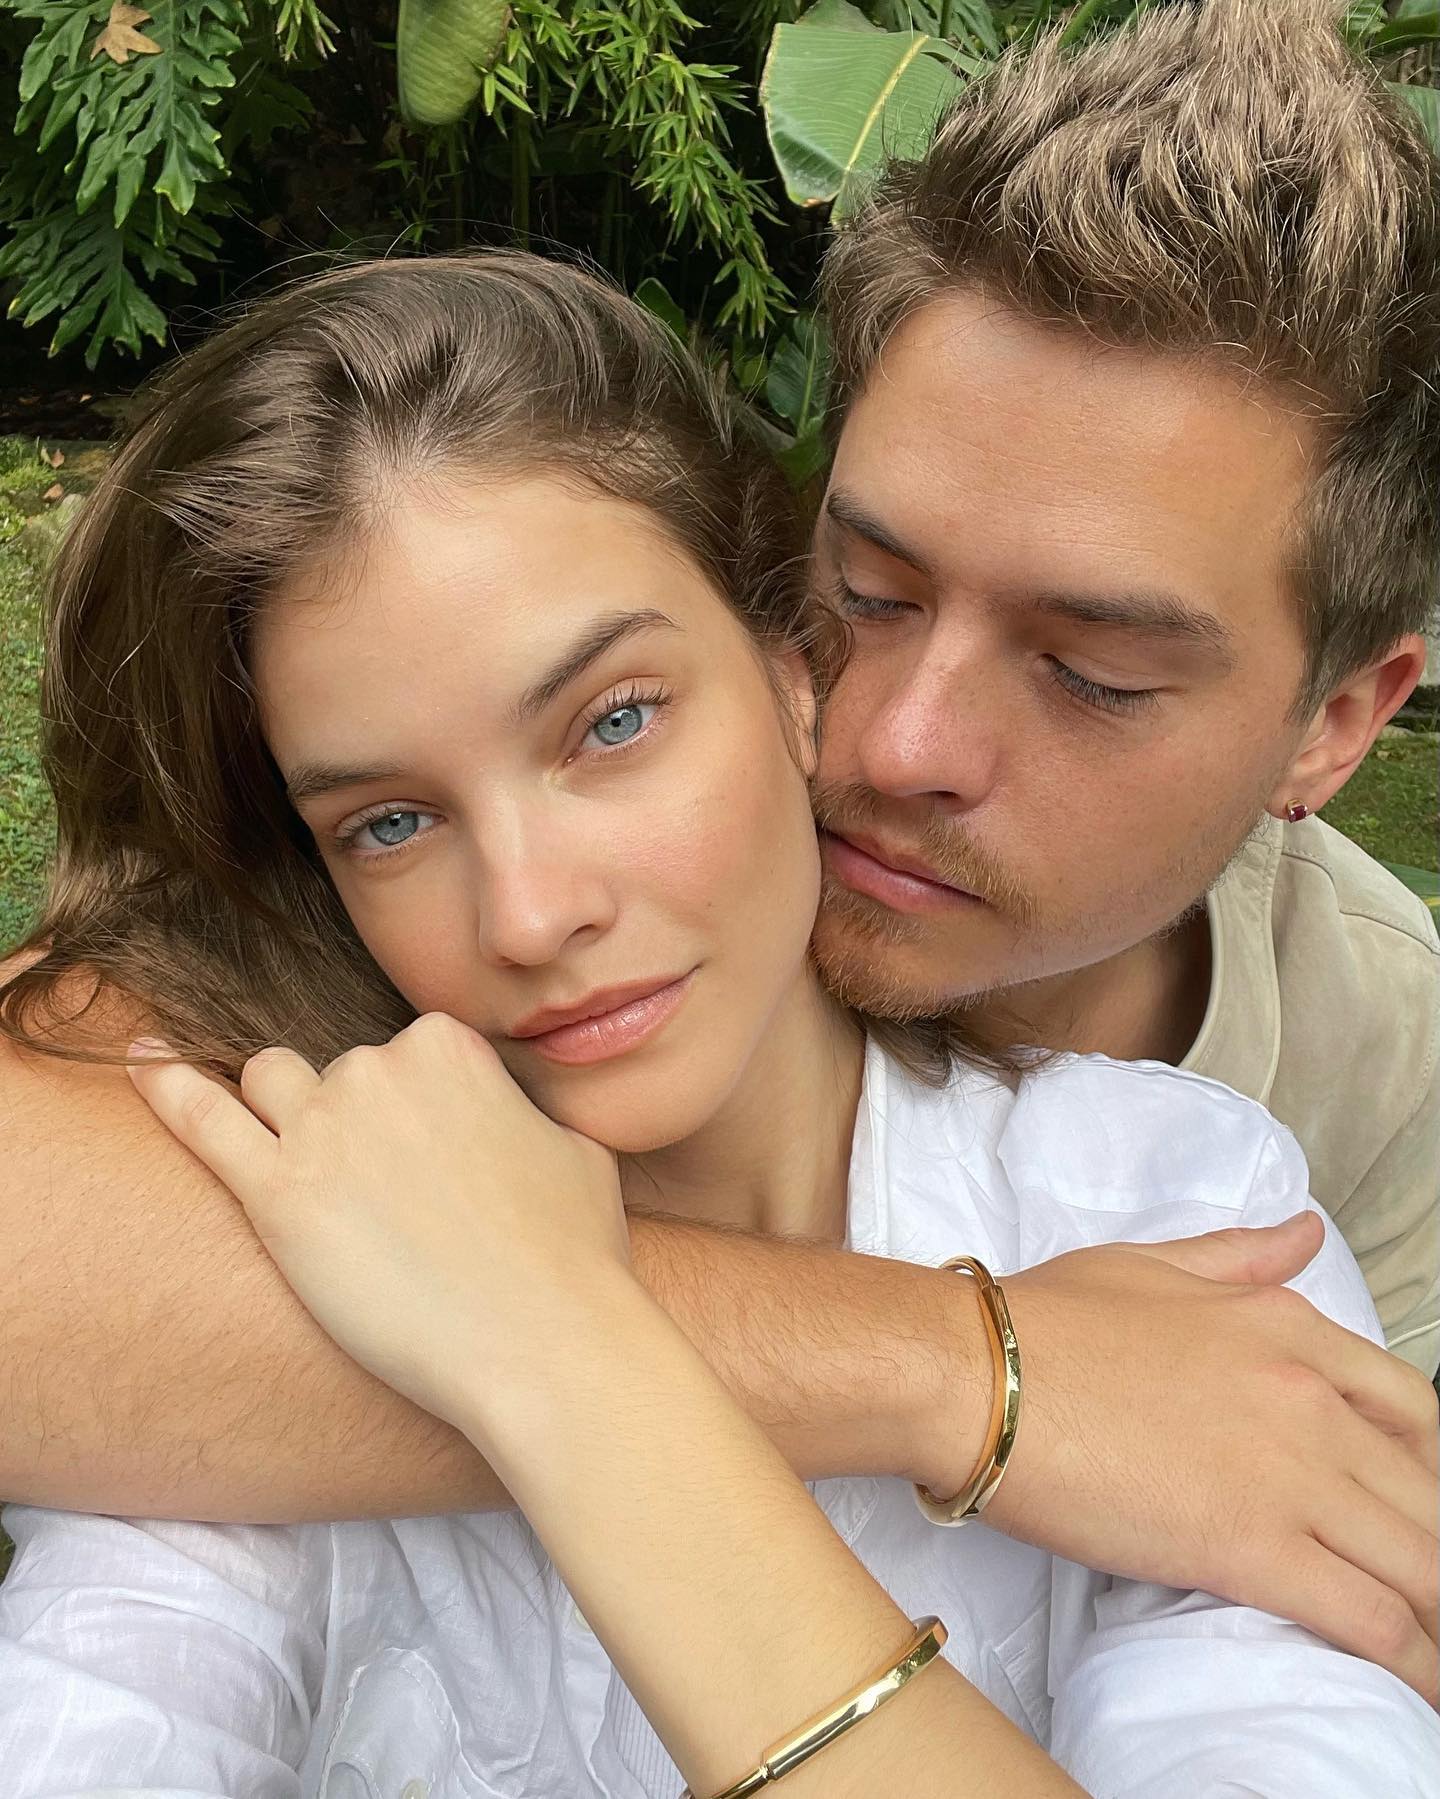 Barbara Palvin & Dylan Sprouse Tie the Knot in Secret Wedding